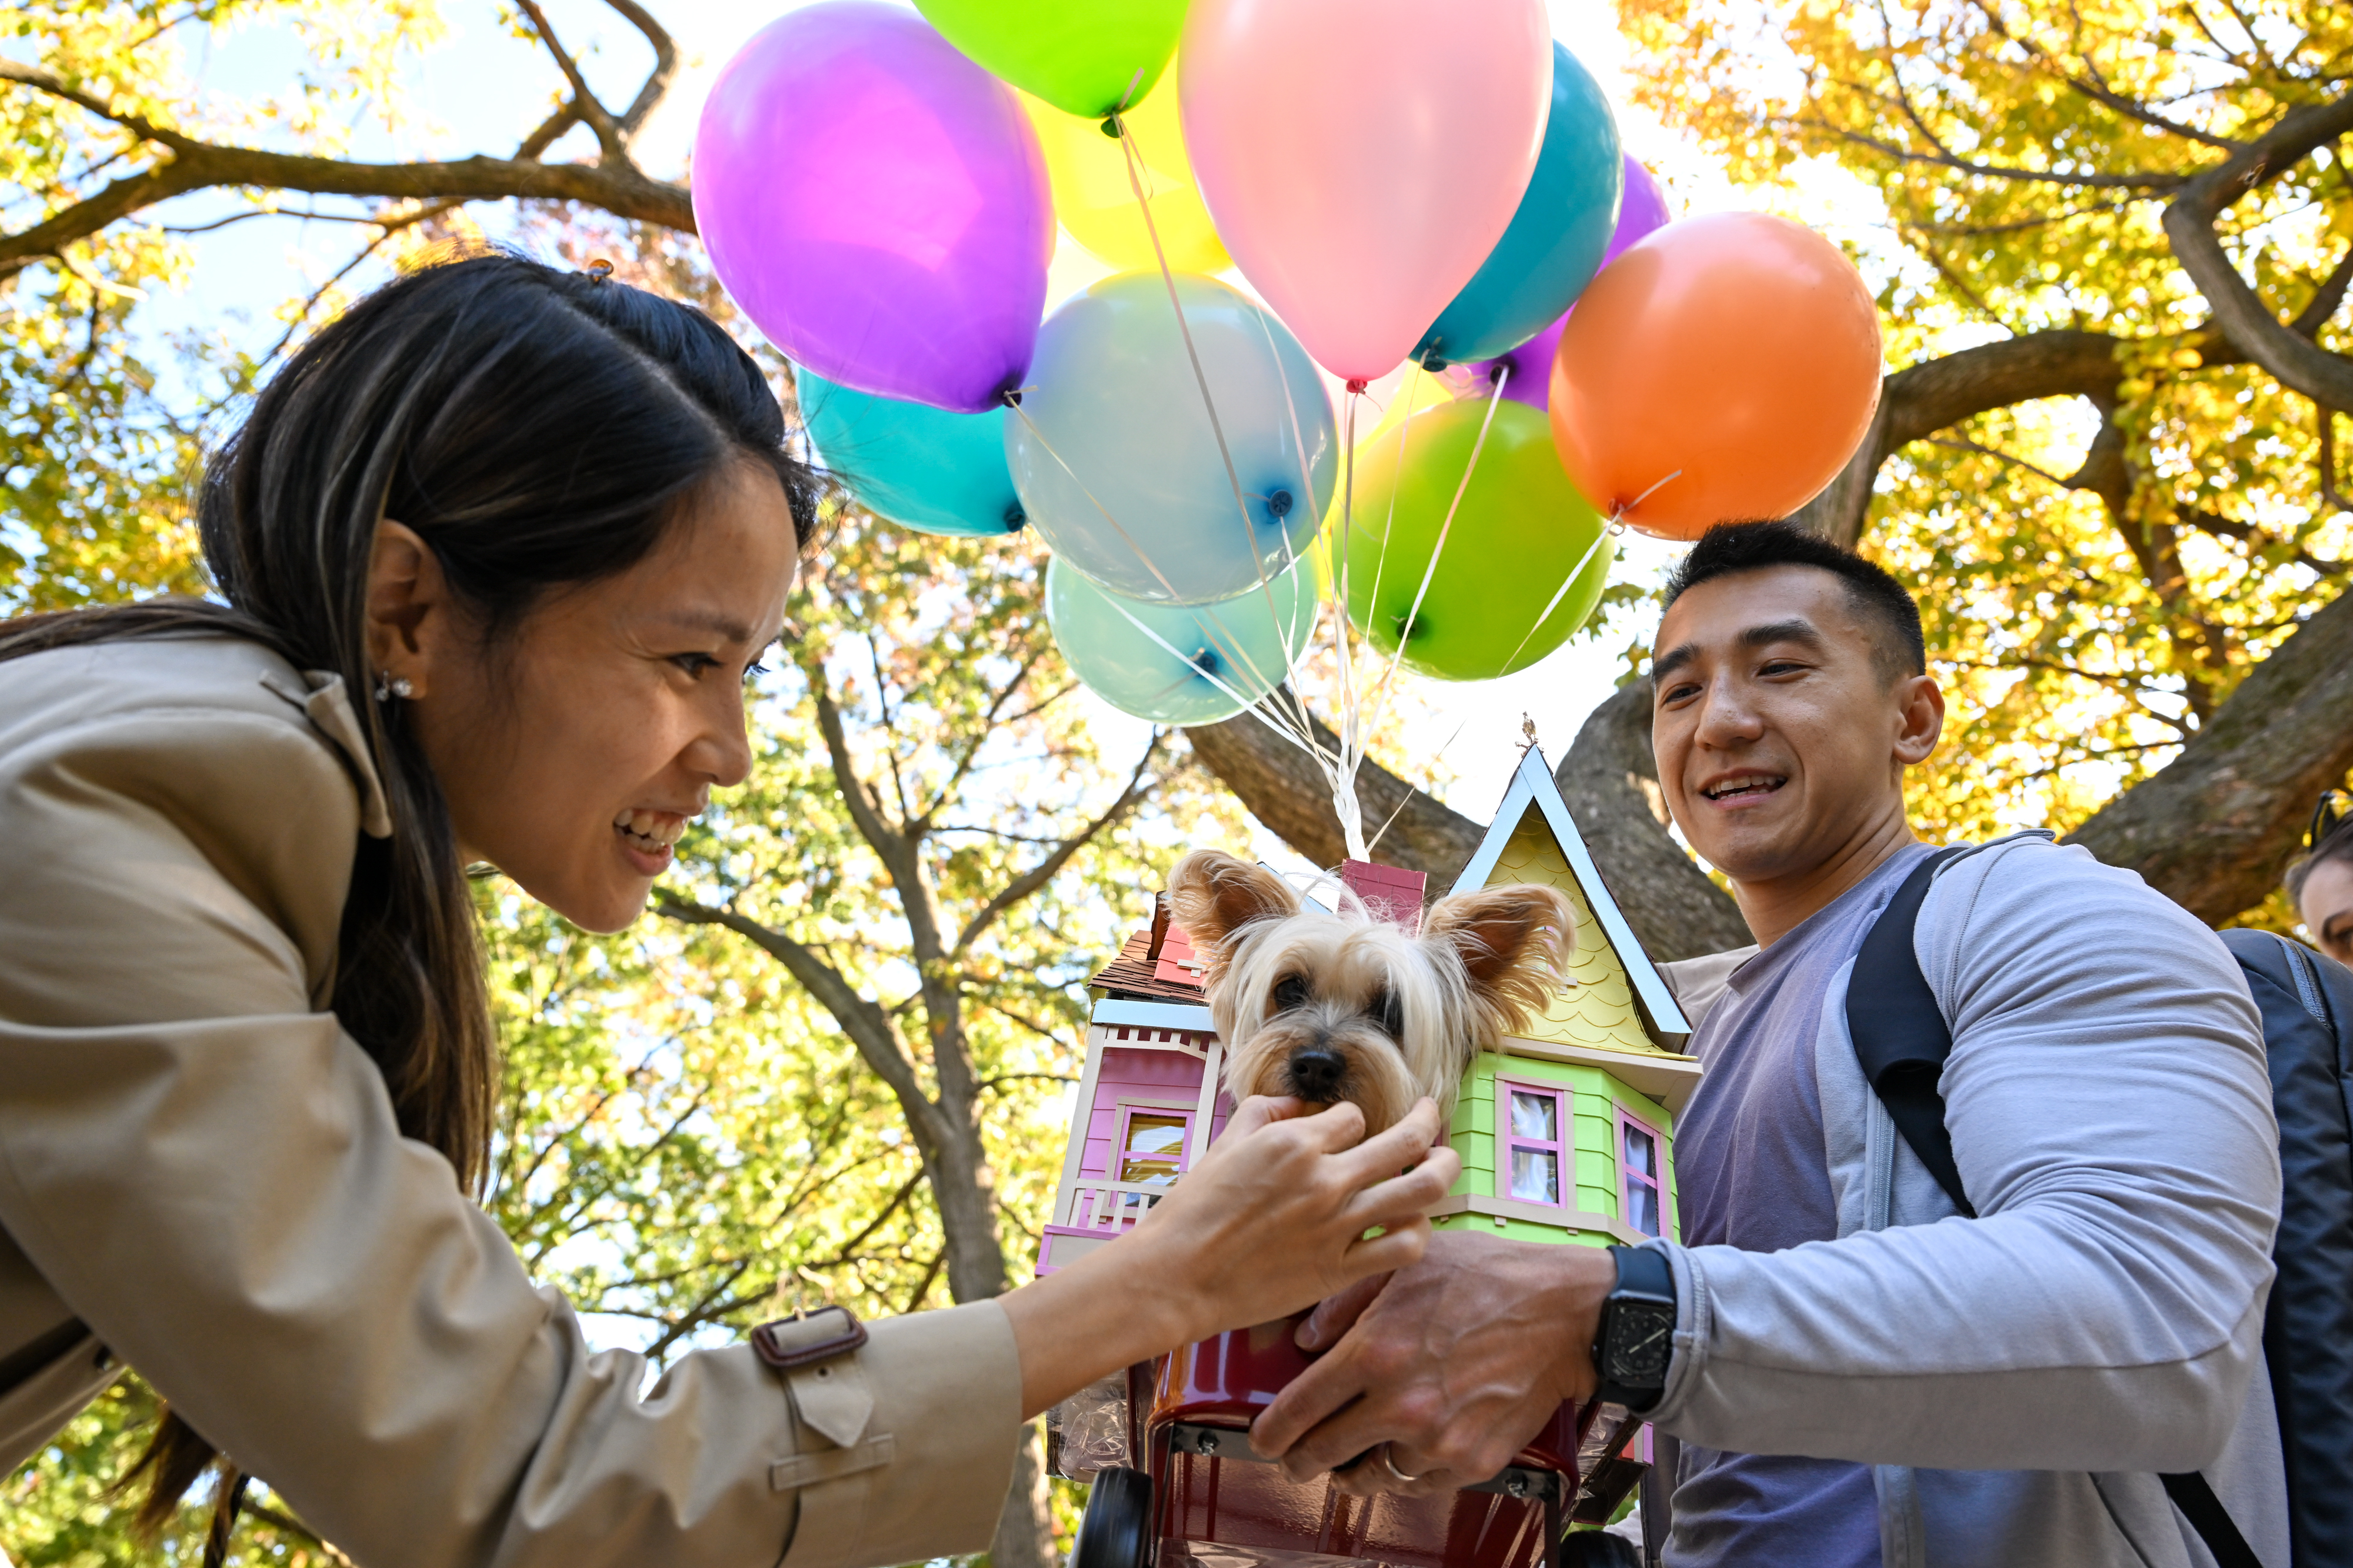 Billy Chan and Nicole Ng with their dog, Allie the terroir, dressed as UP participates in the Annual Tompkins Square Halloween Dog Parade. (Photo by Alexi Rosenfeld/Getty Images)